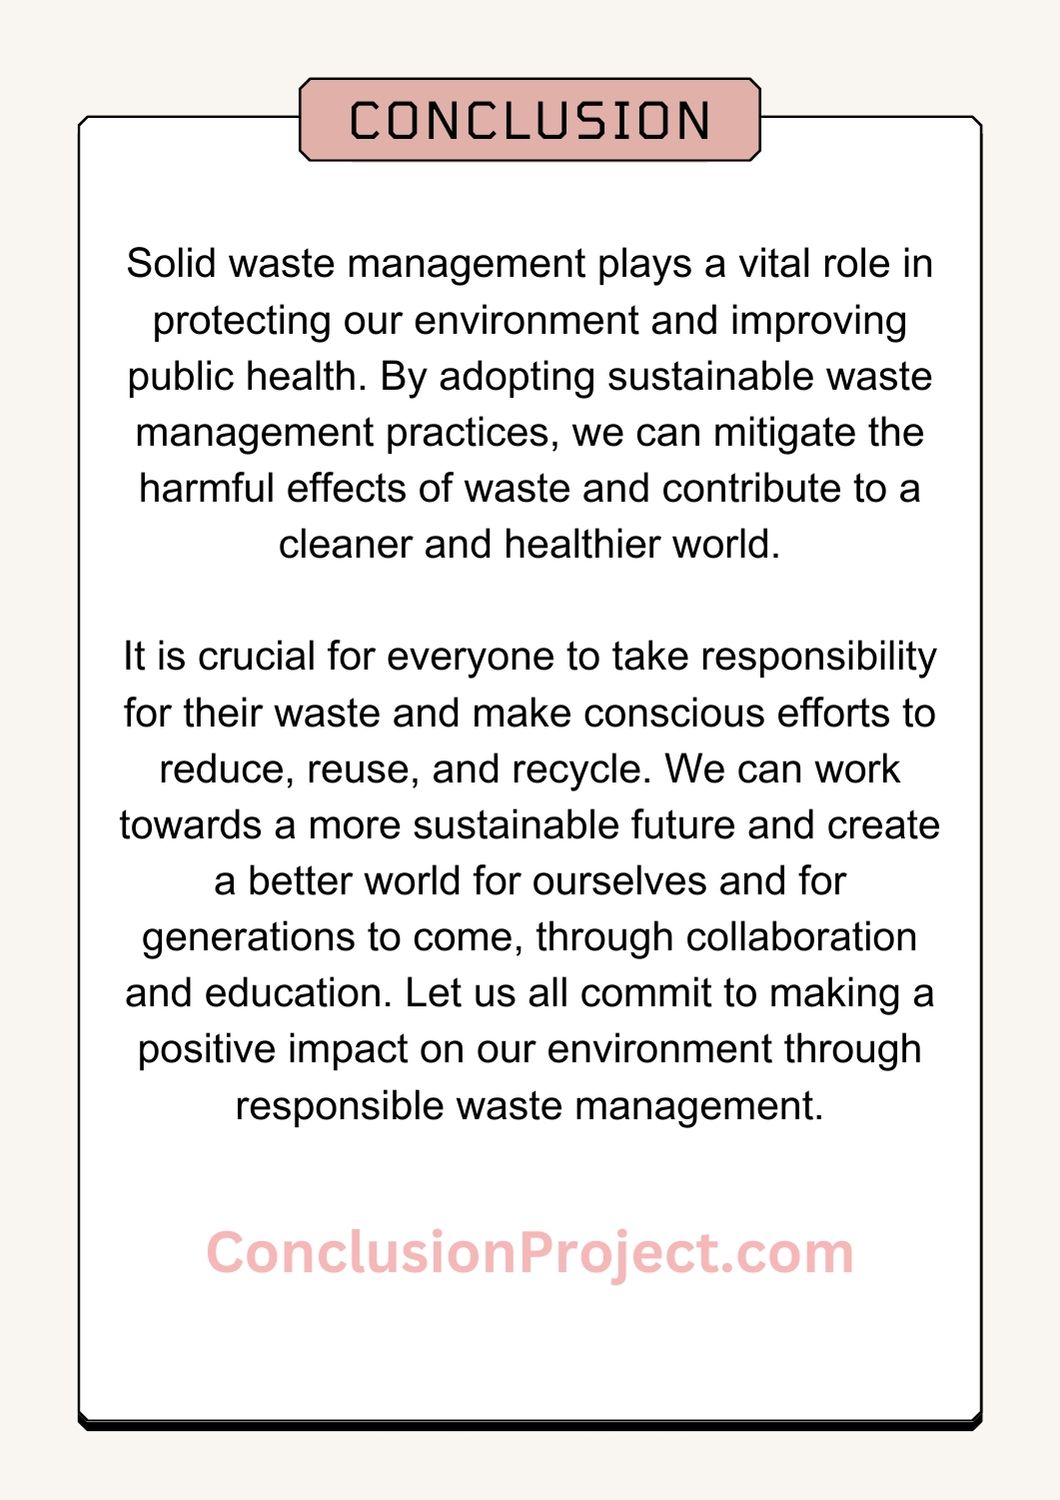 Solid Waste Management Conclusion